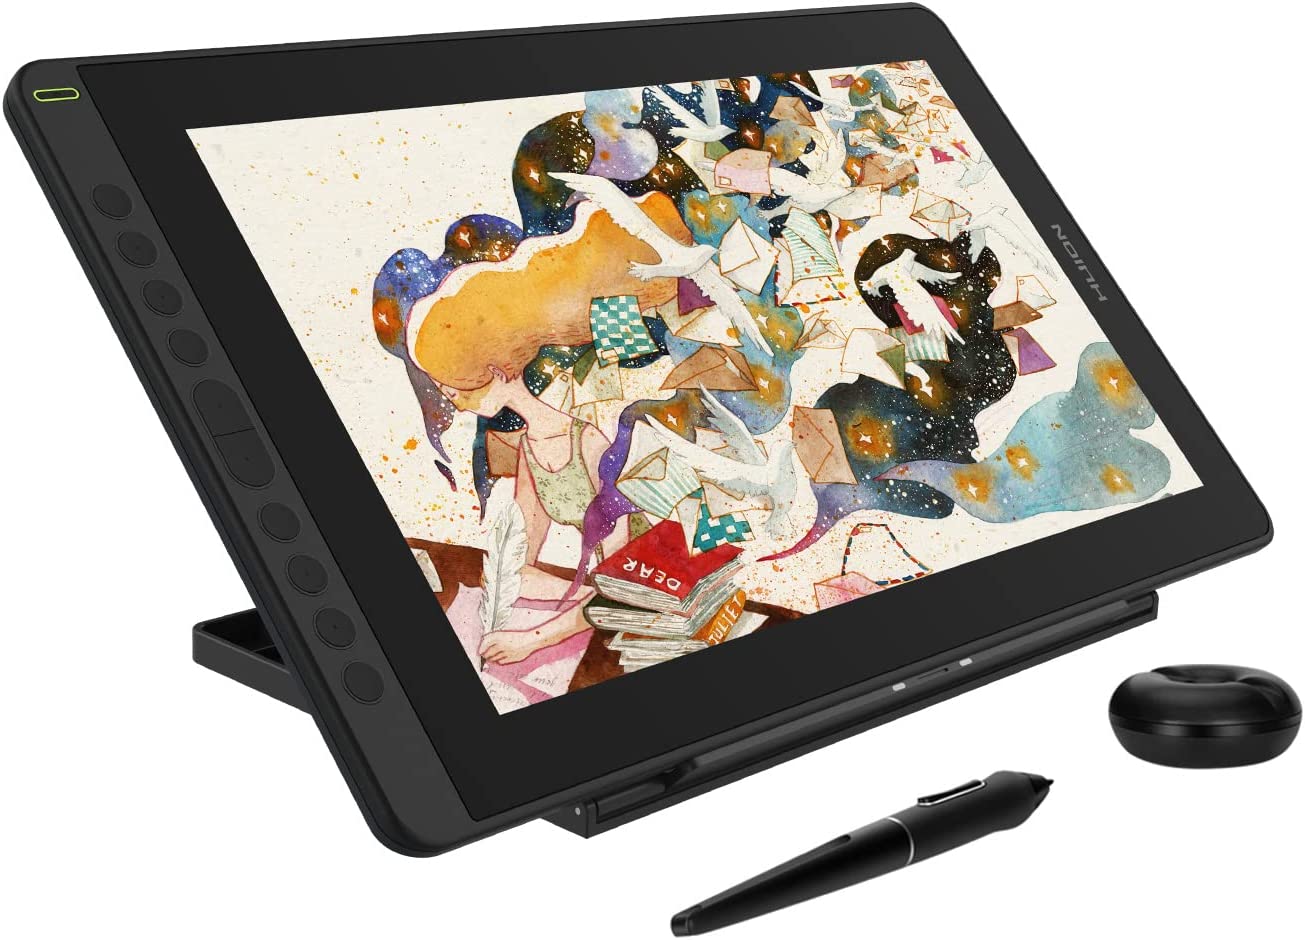 2021 HUION KAMVAS 16 Graphics Drawing Tablet with [...]